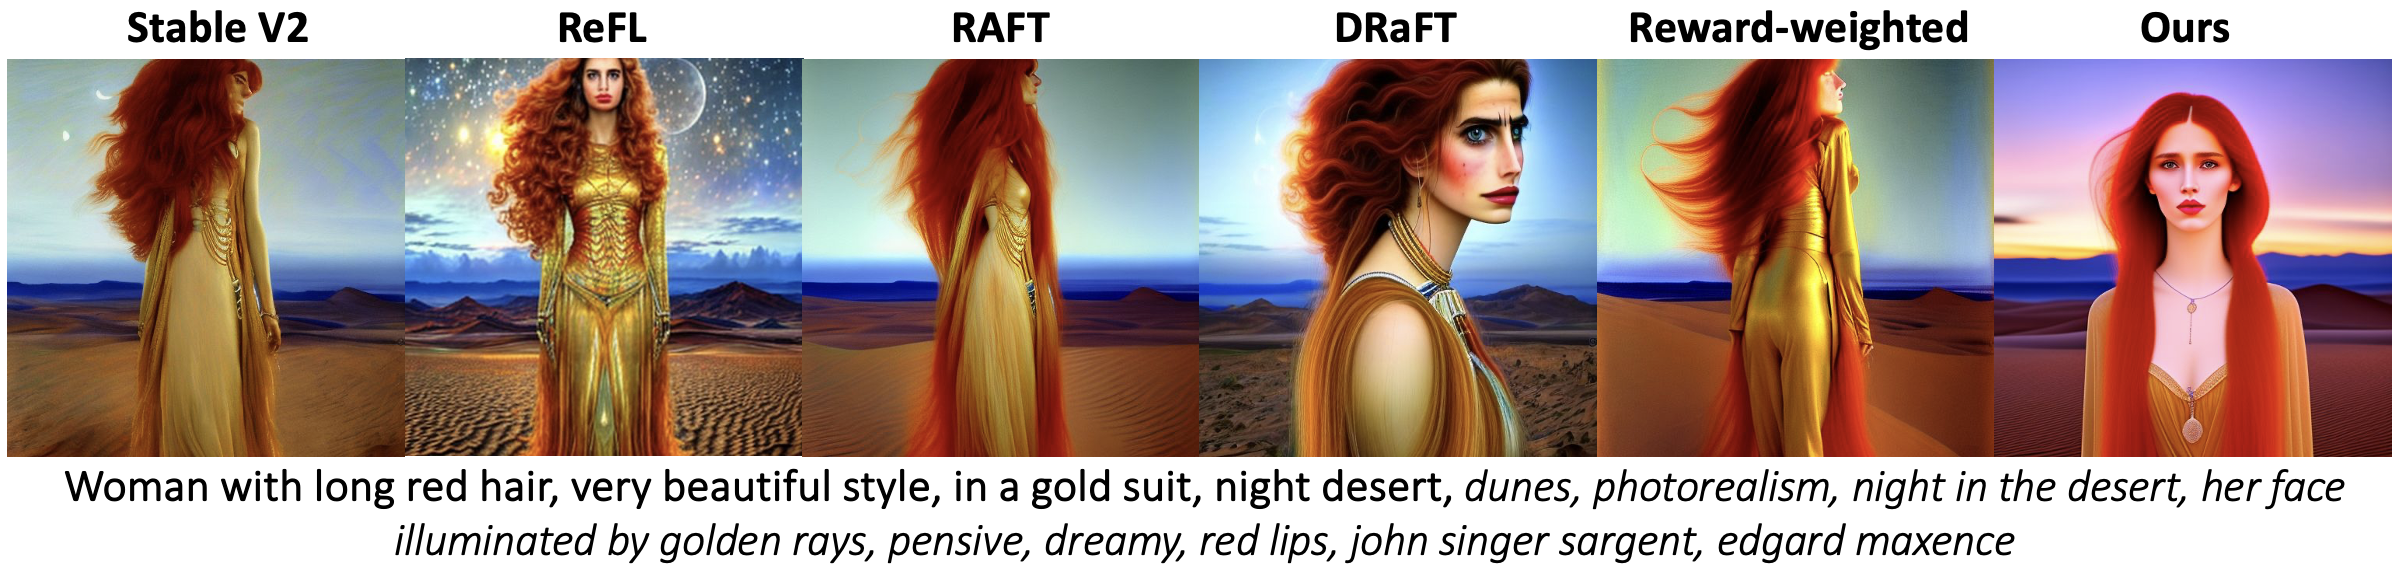 Woman with long red hair, very beautiful style, in a gold suit, night desert, dunes, photorealism, night in the desert, her face illuminated by golden rays, pensive, dreamy, red lips, john singer sargent, edgard maxence